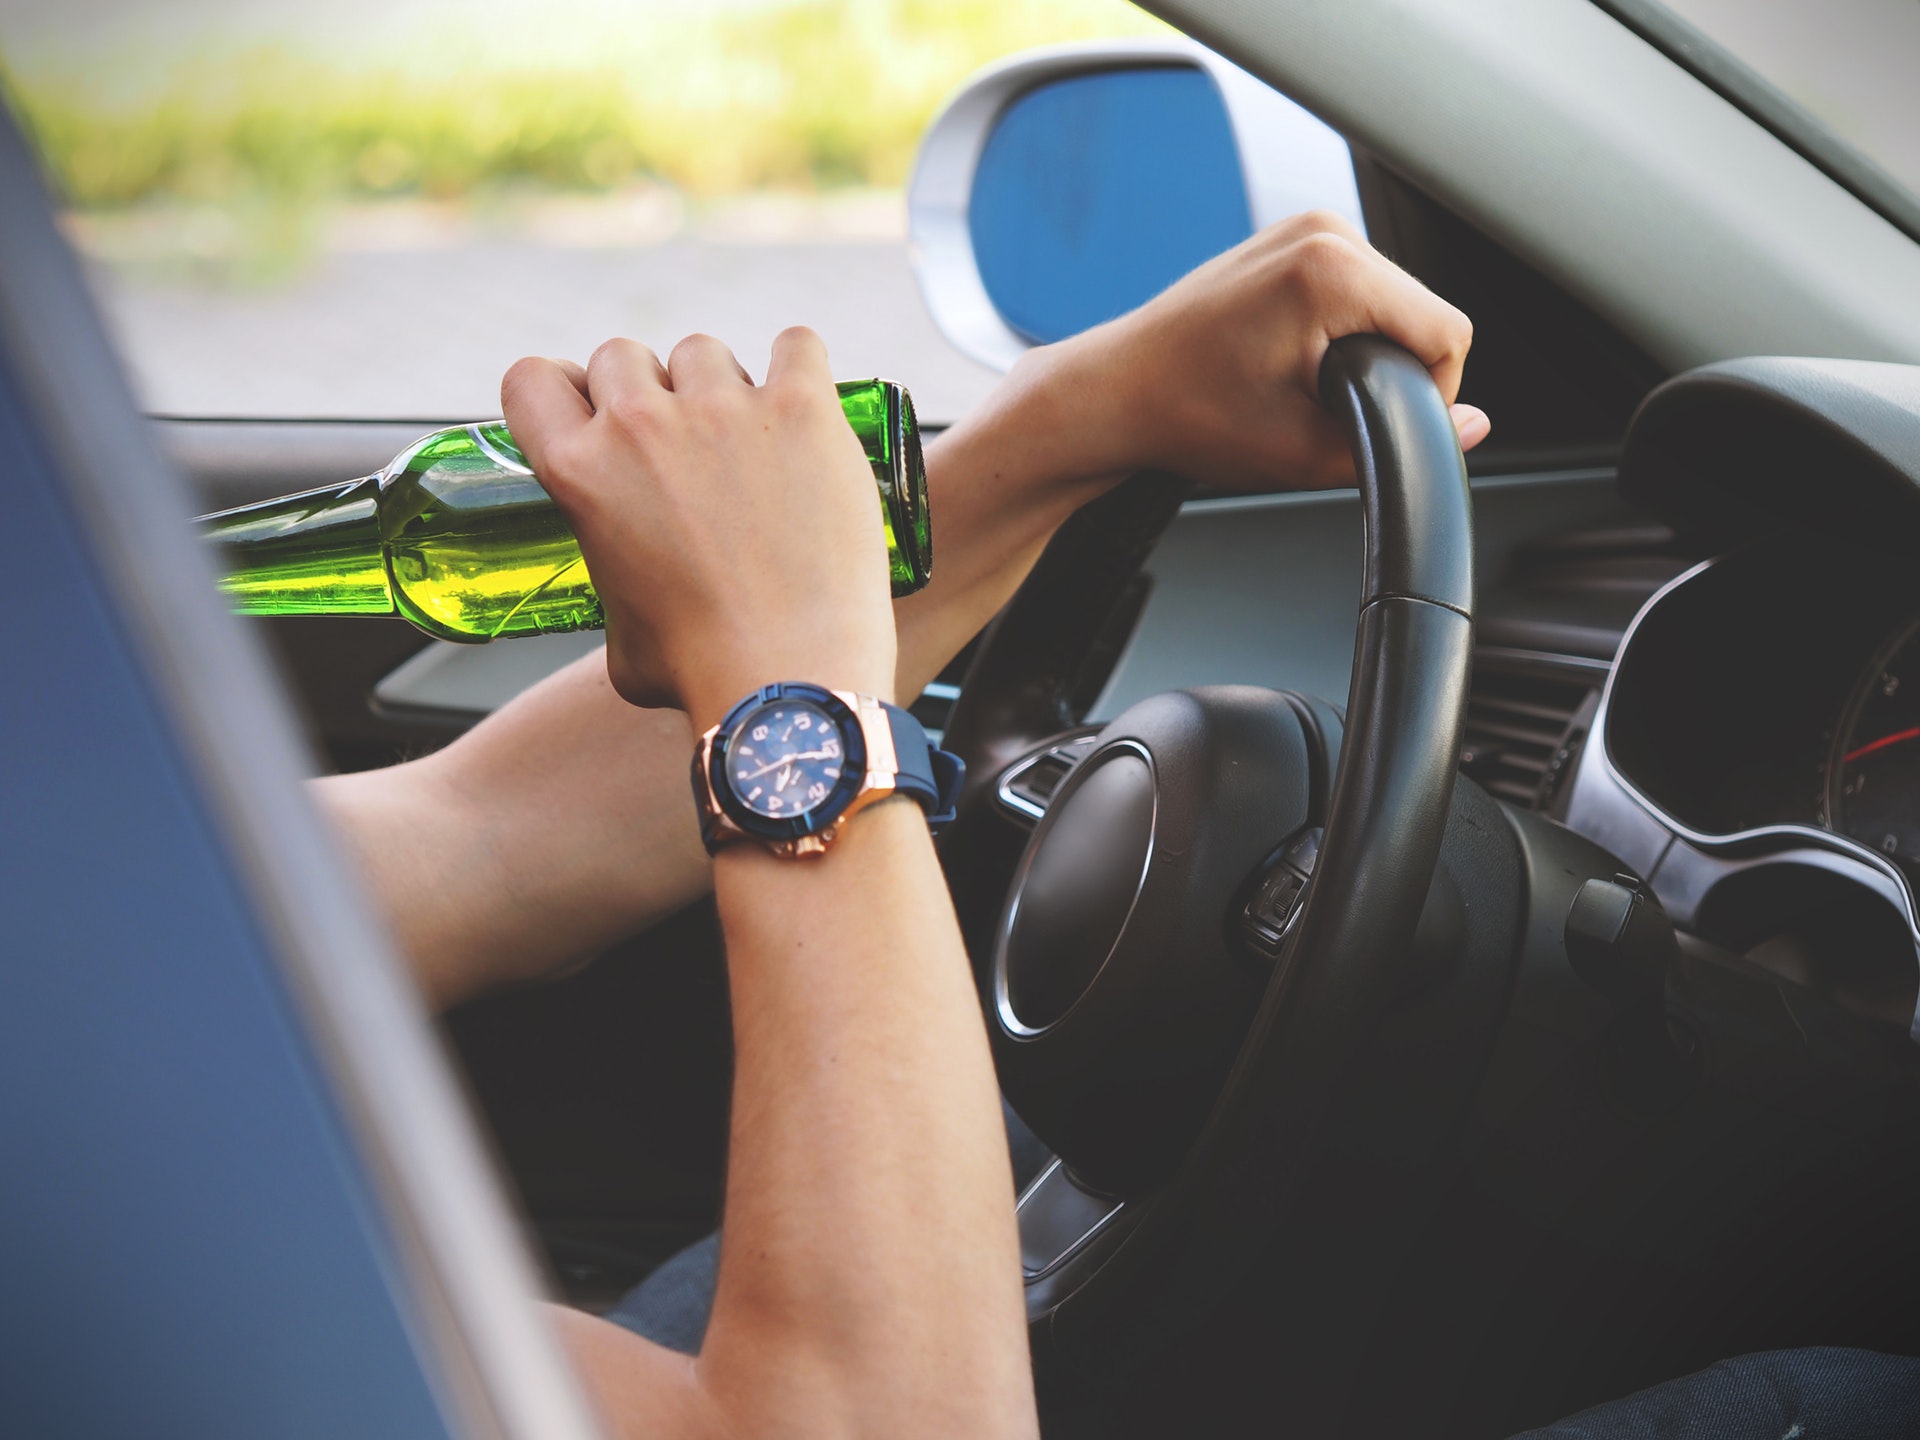 Does Insurance Pay for a DUI Accident?